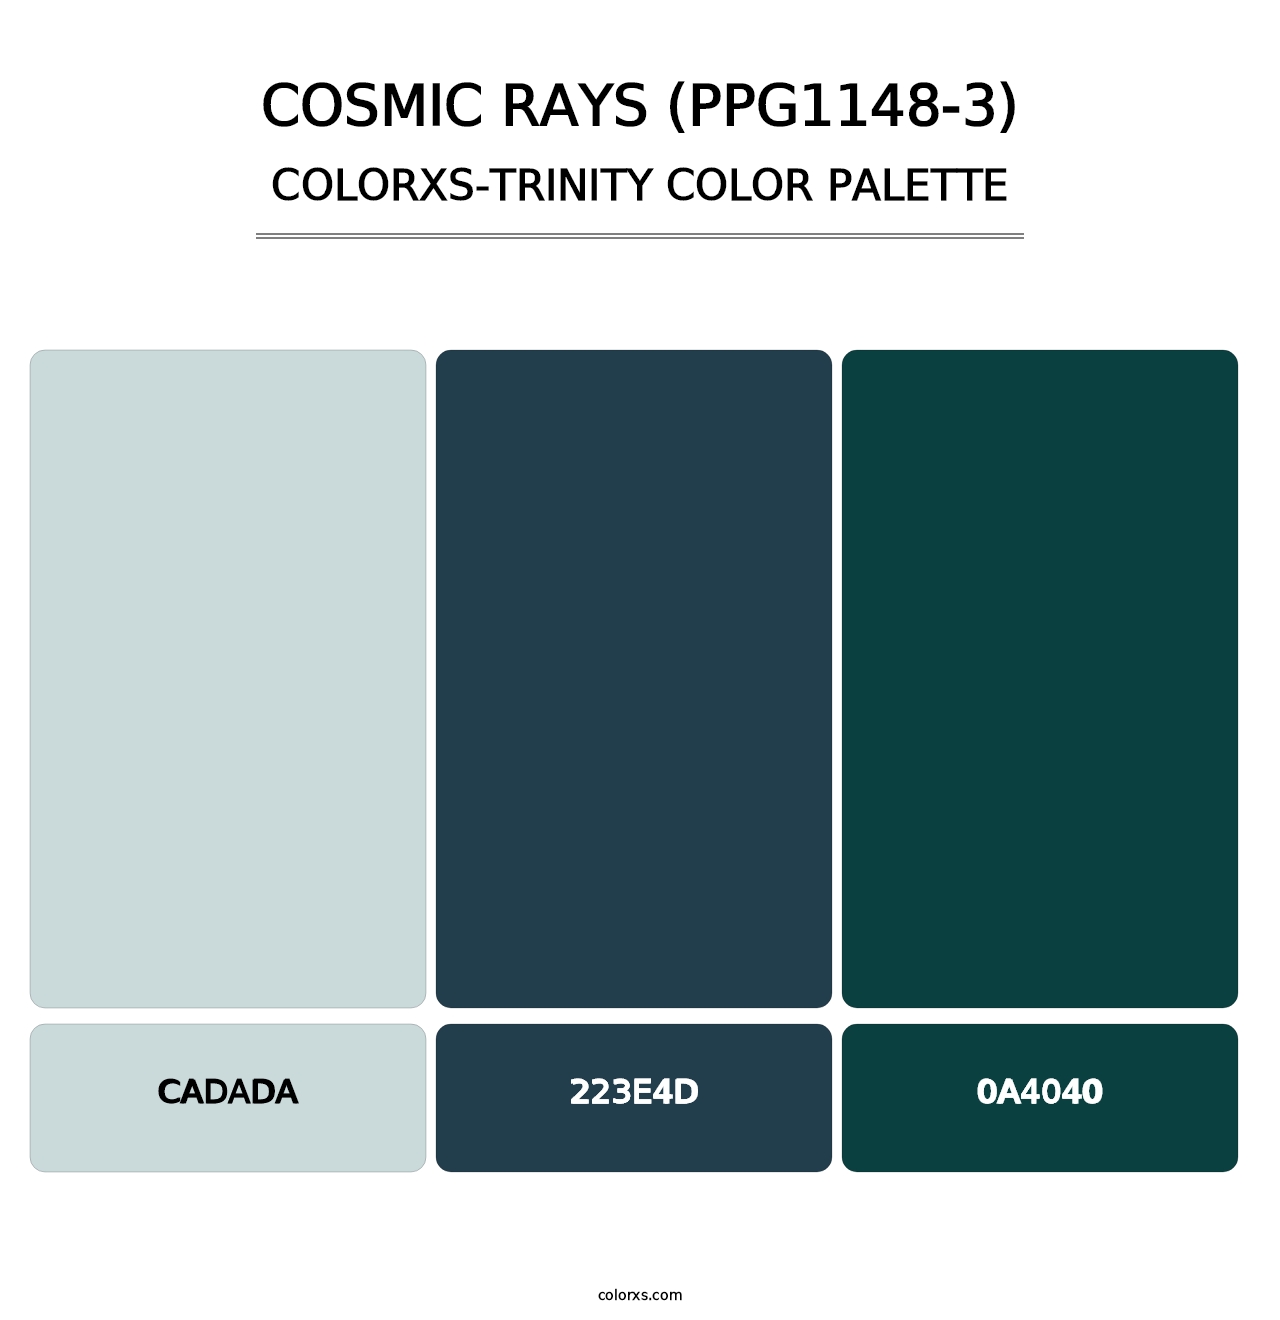 Cosmic Rays (PPG1148-3) - Colorxs Trinity Palette